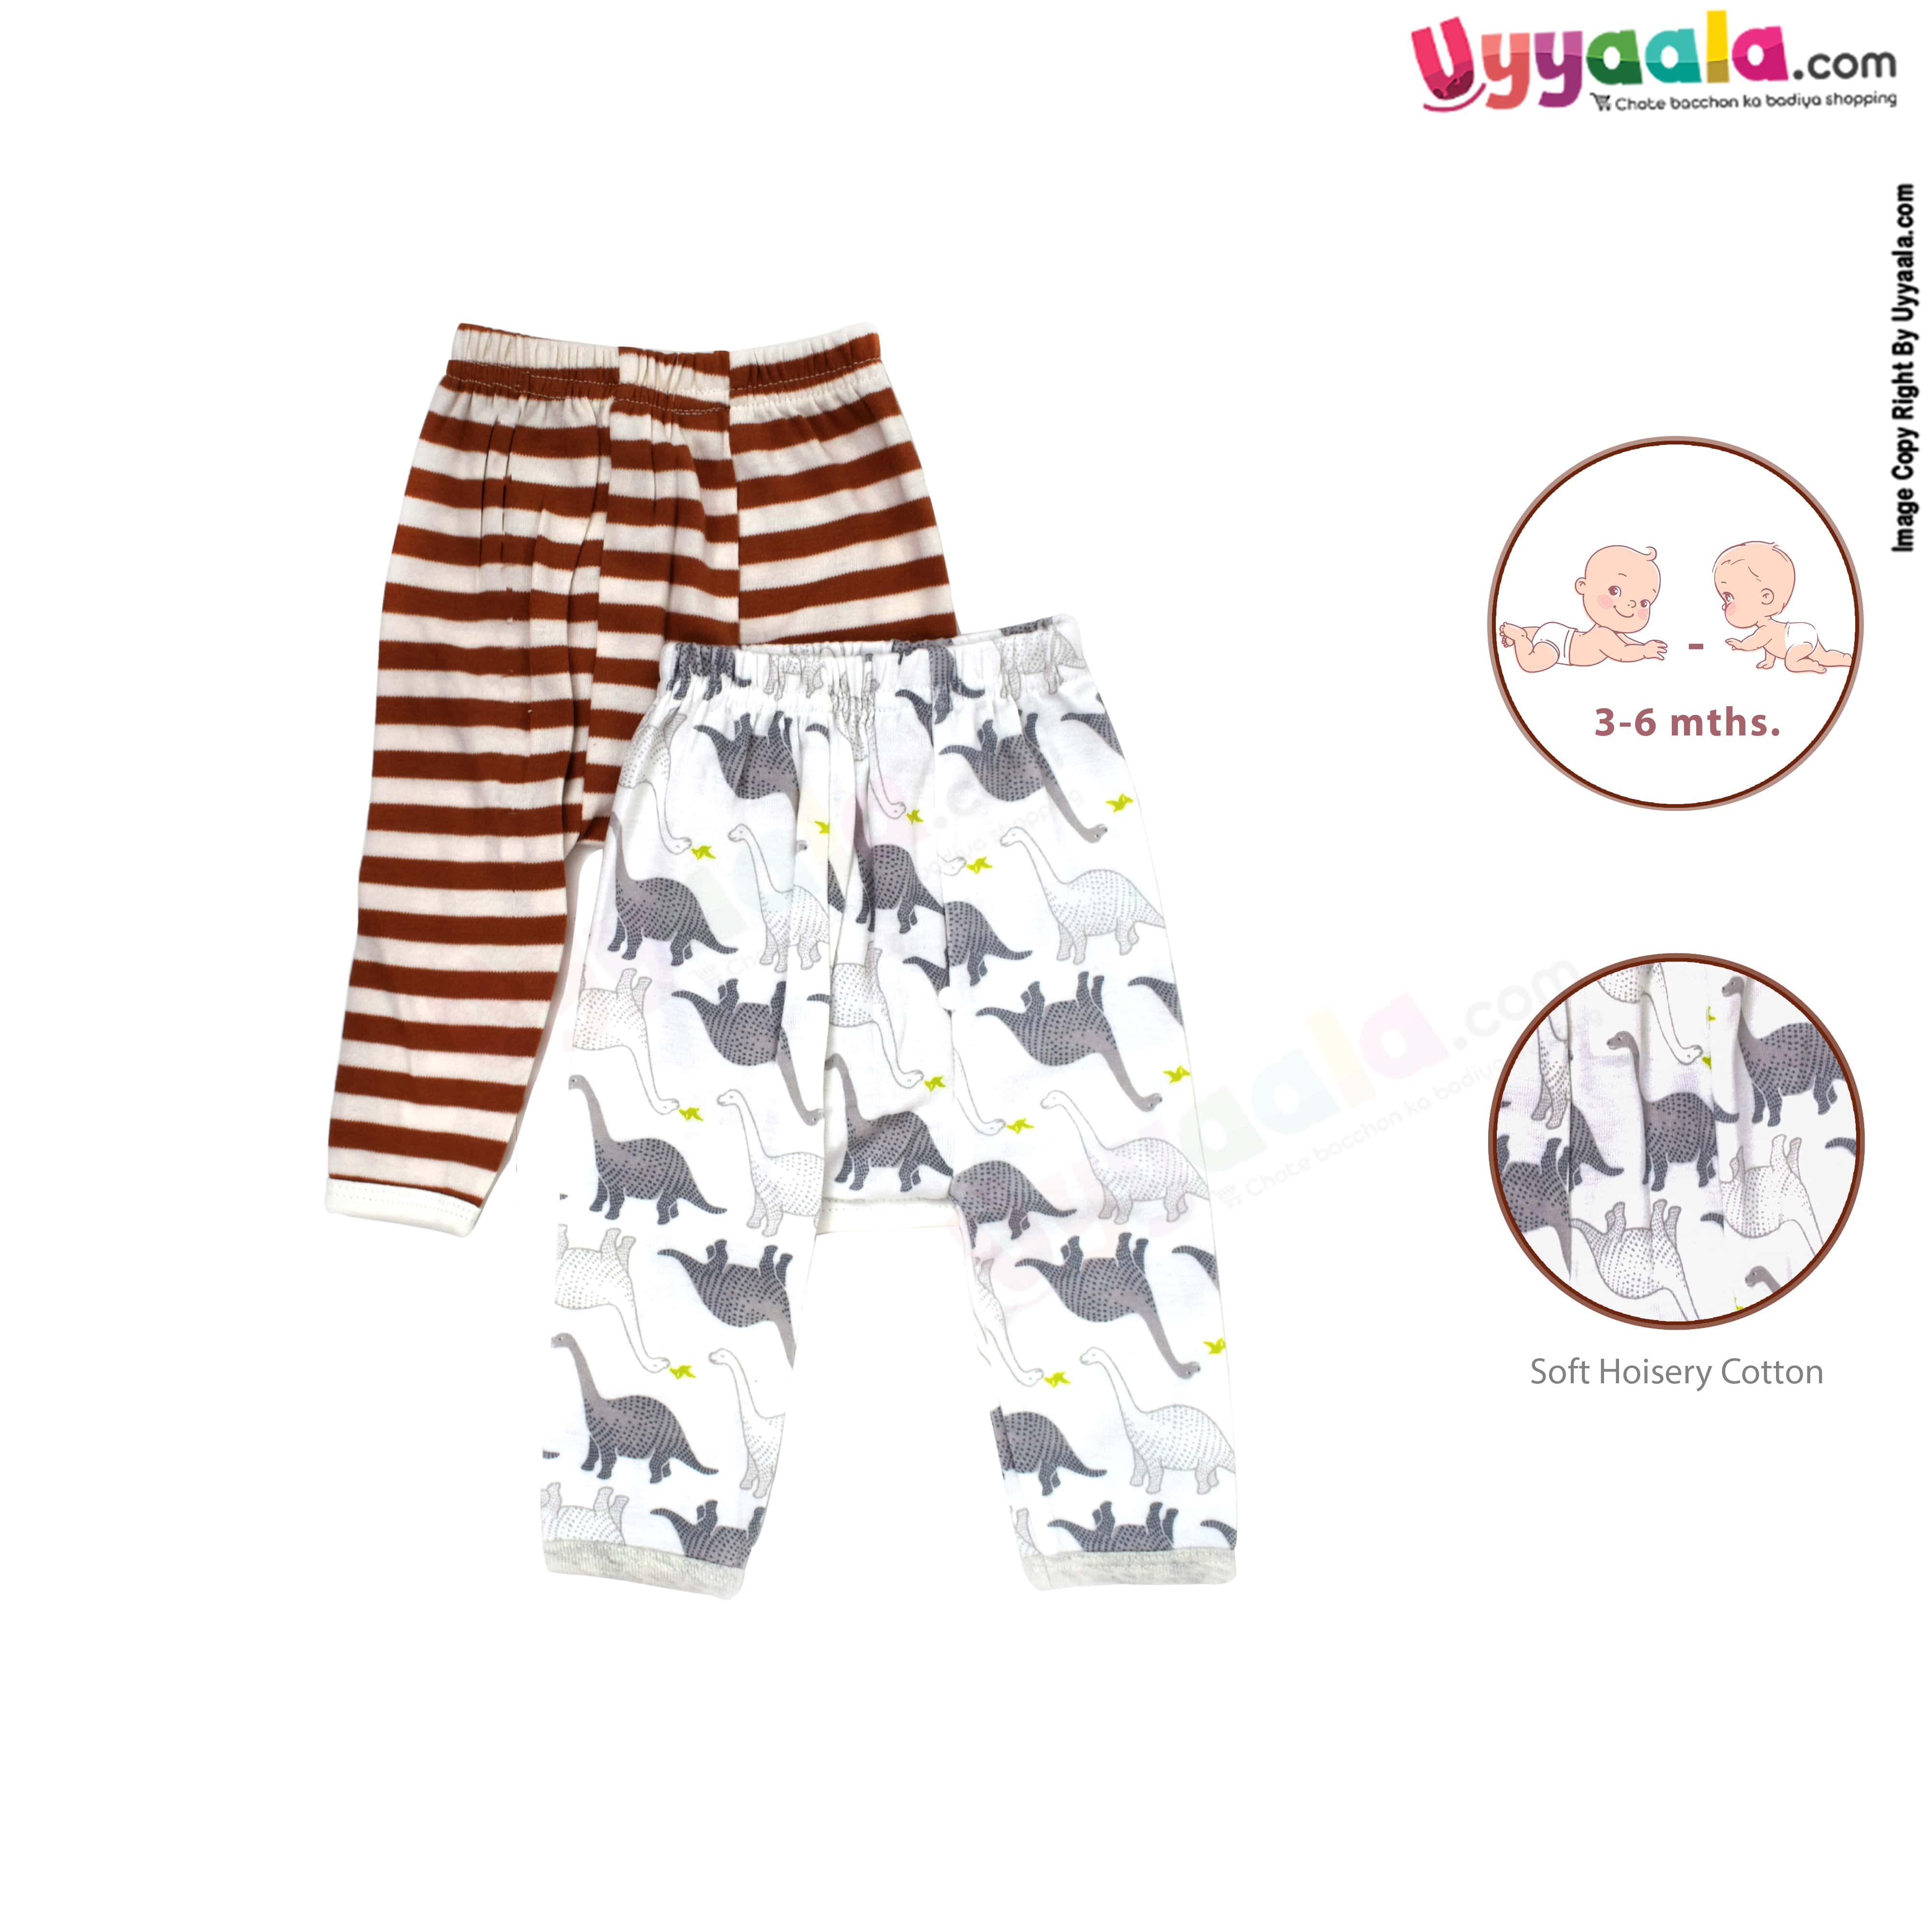 PRECIOUS ONE diaper pants 100% soft hosiery cotton pack of 2 - white with dinosaurs & brown with cream stripes prints (3-6m)